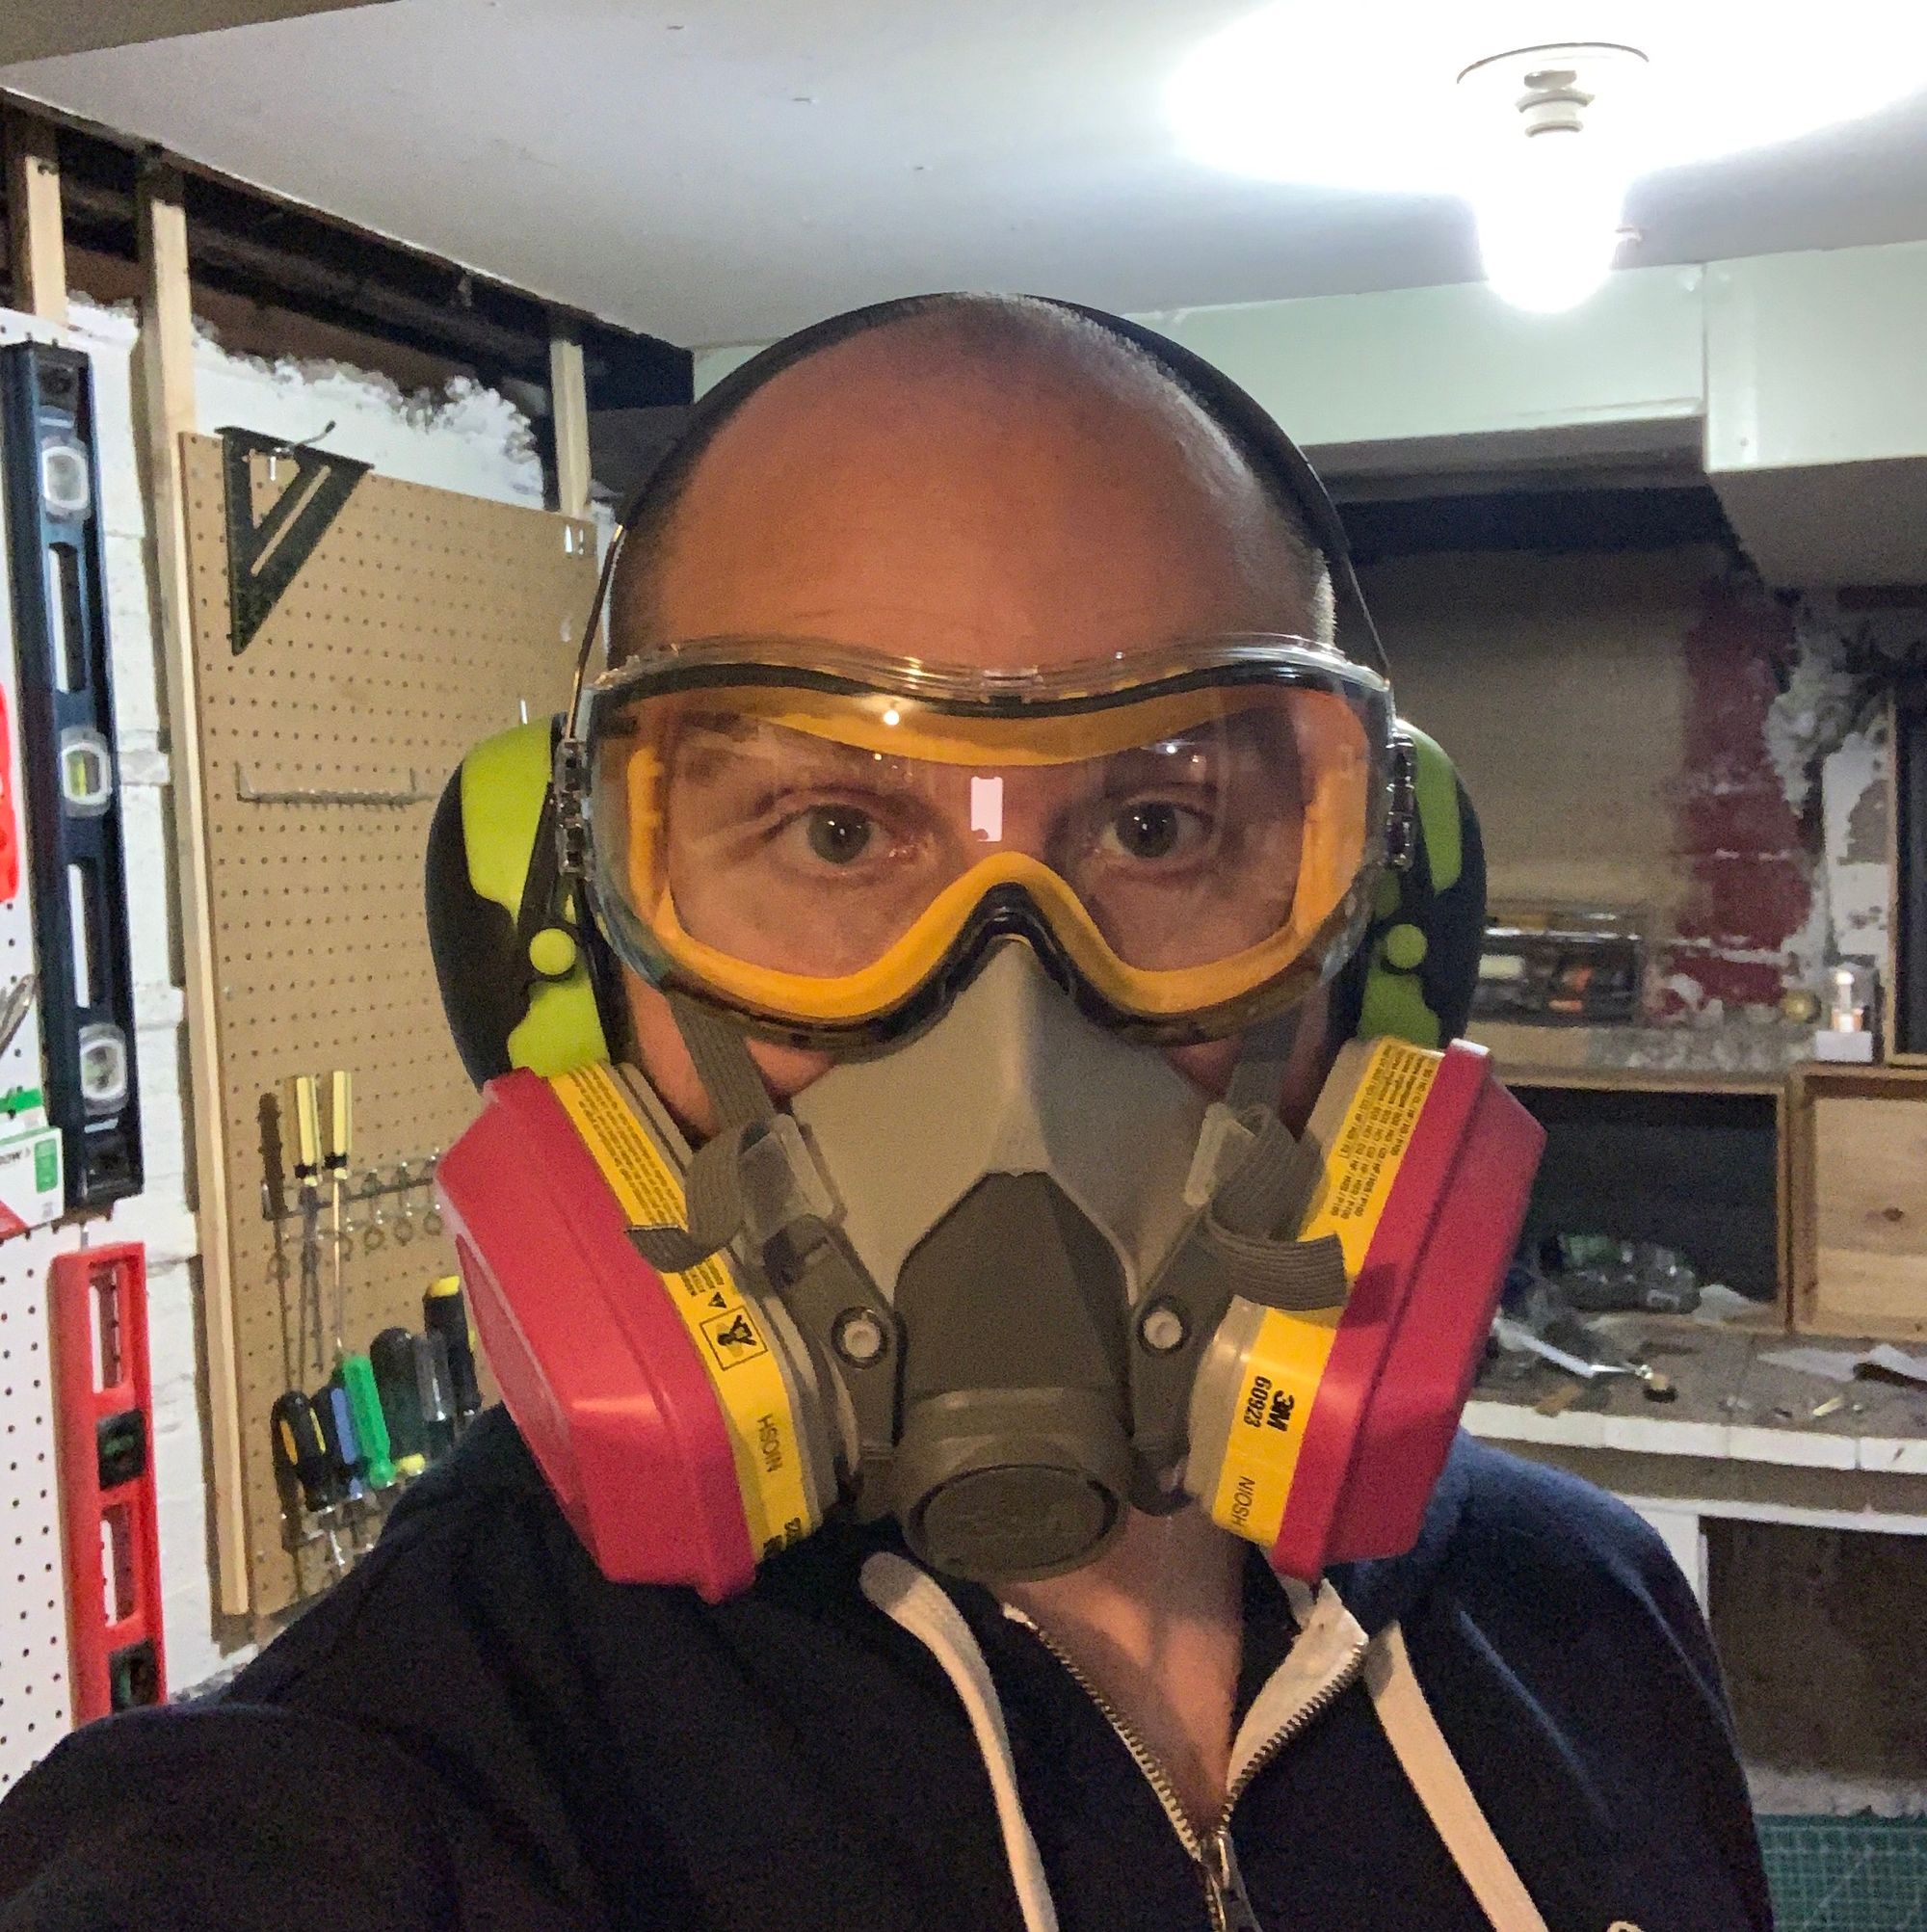 Me, wearing a respirator, as well as safety goggles and hearing protection